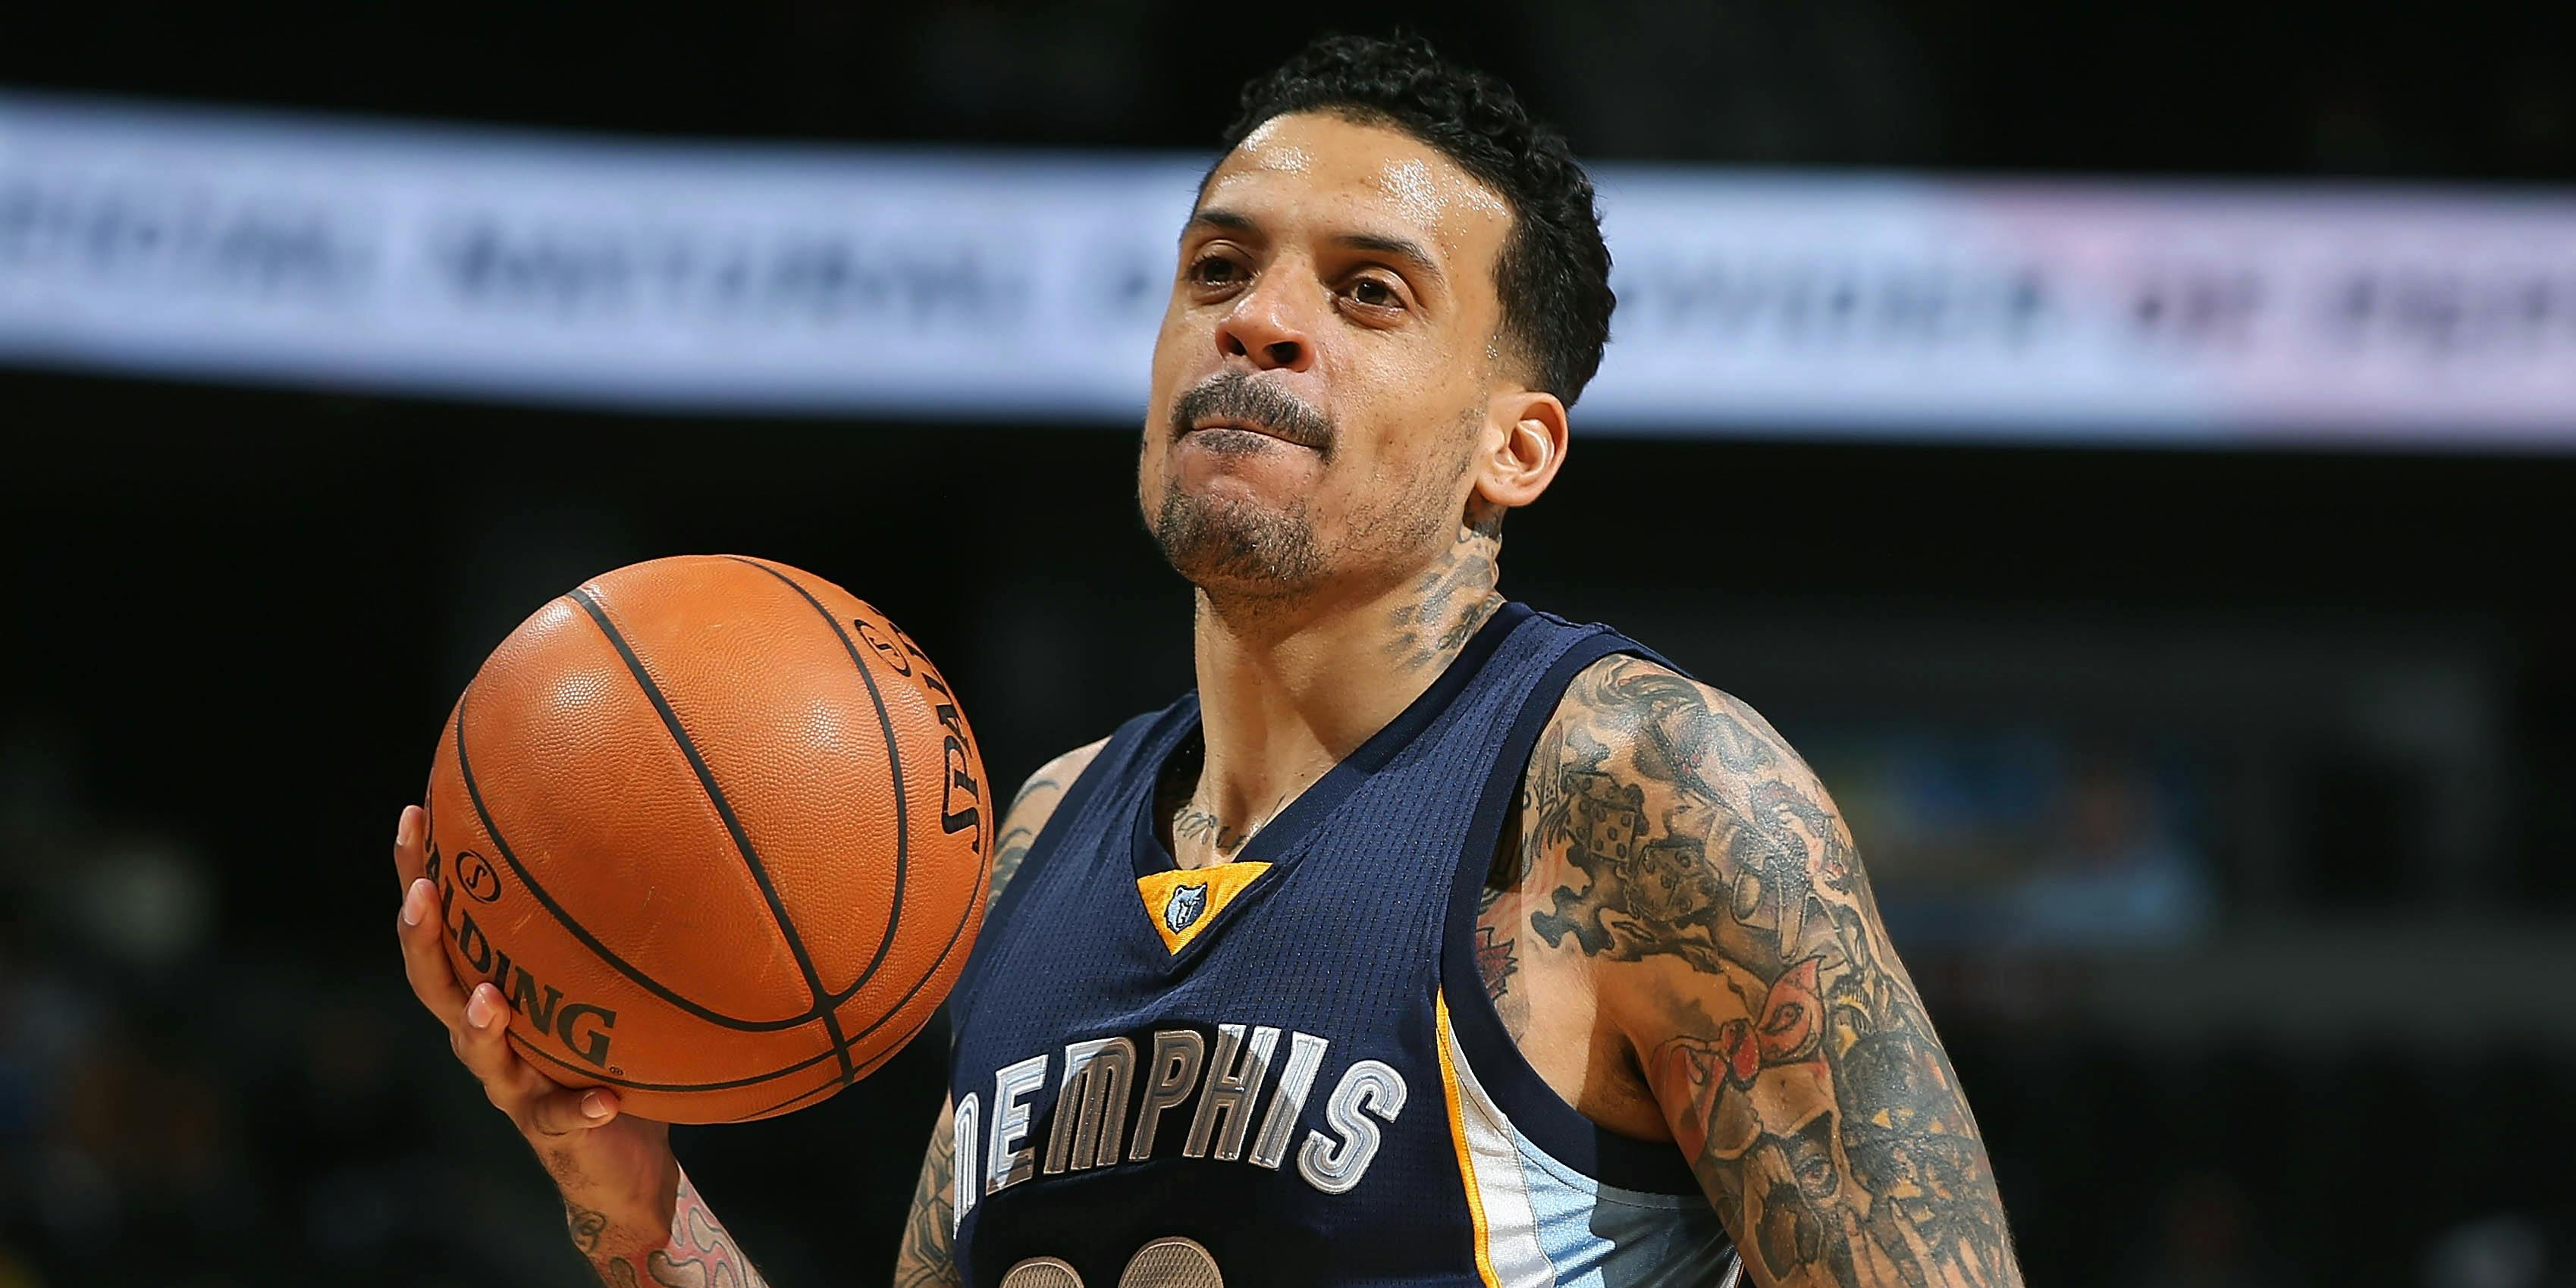 Matt Barnes holding a basketball and licking his lips while playing for the Grizzlies